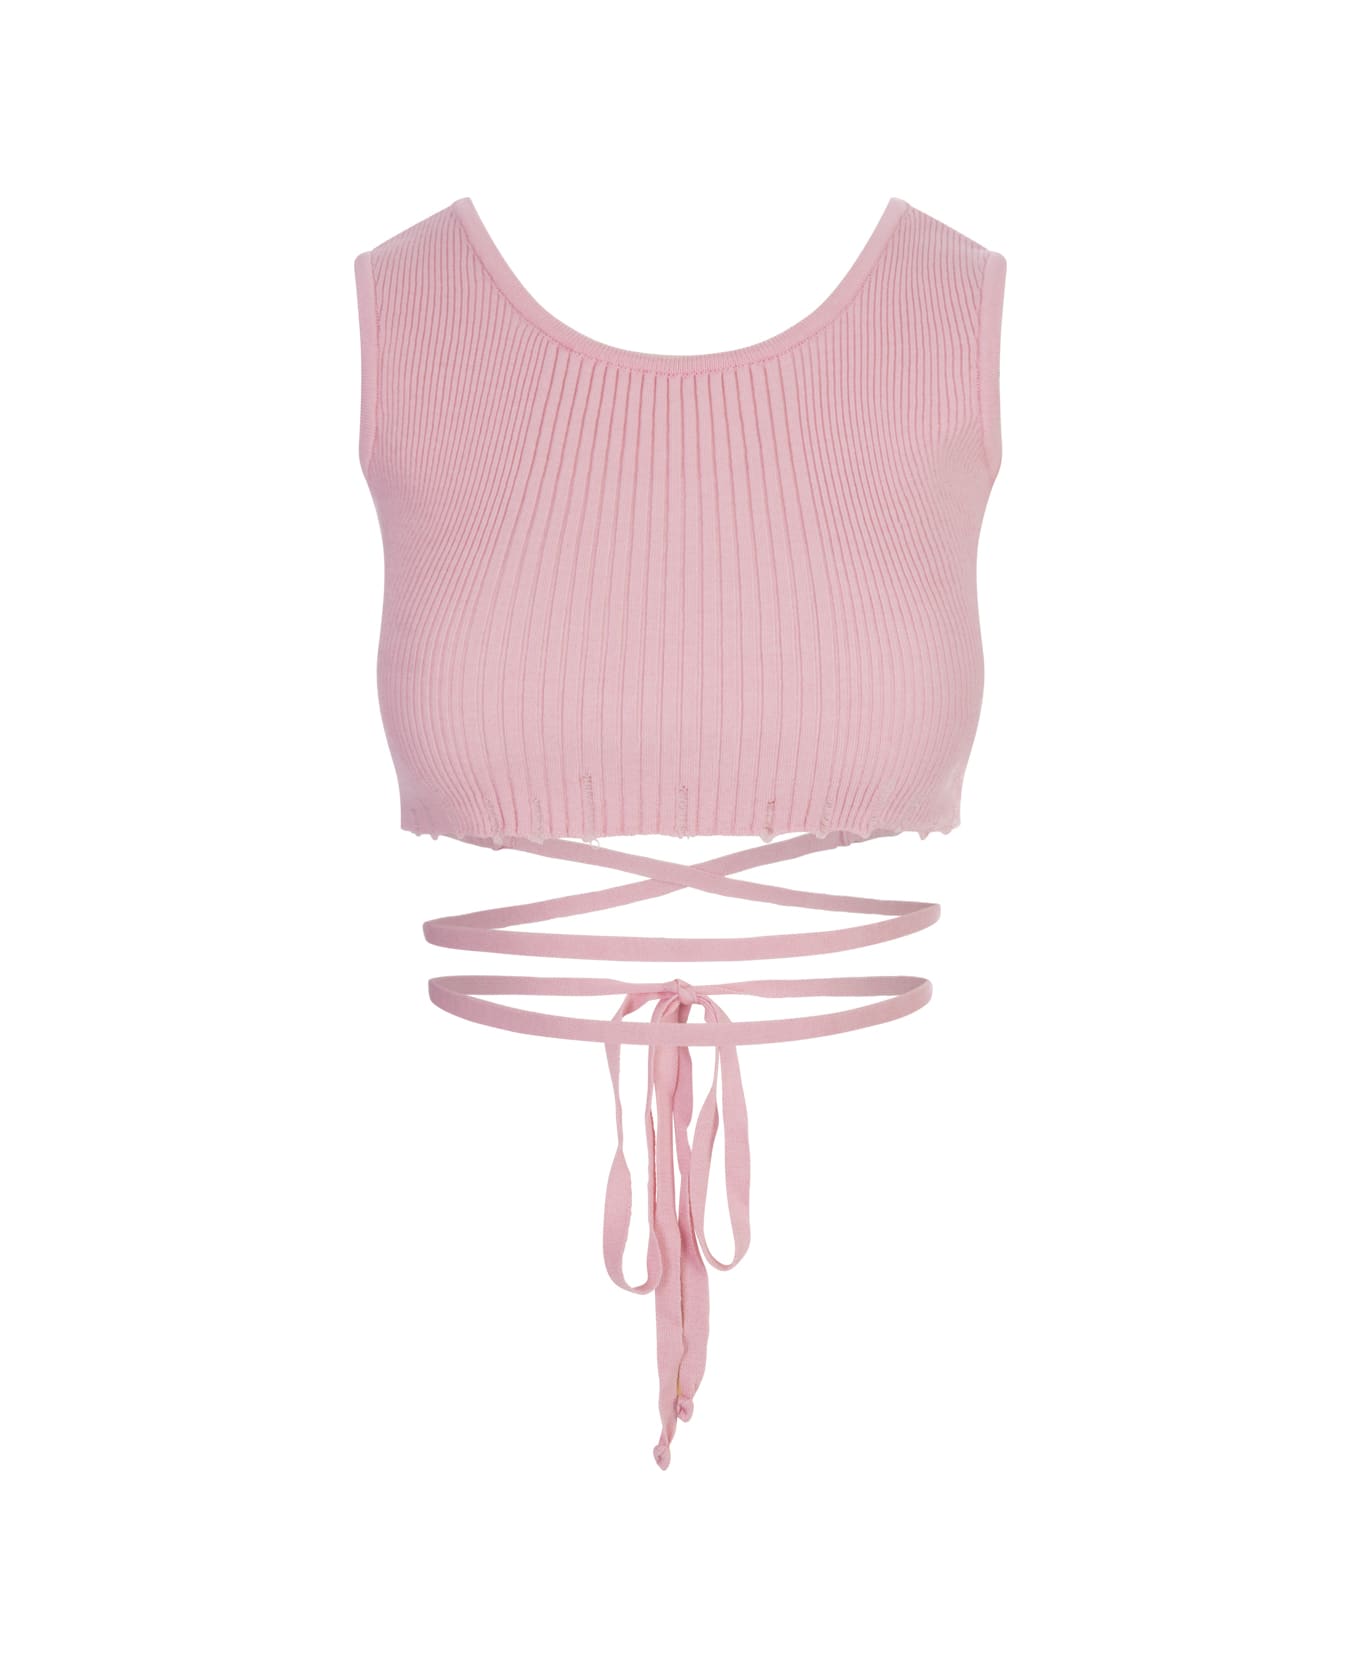 A Paper Kid Pink Ribbed Knit Crop Top With Distressed Effect - Pink